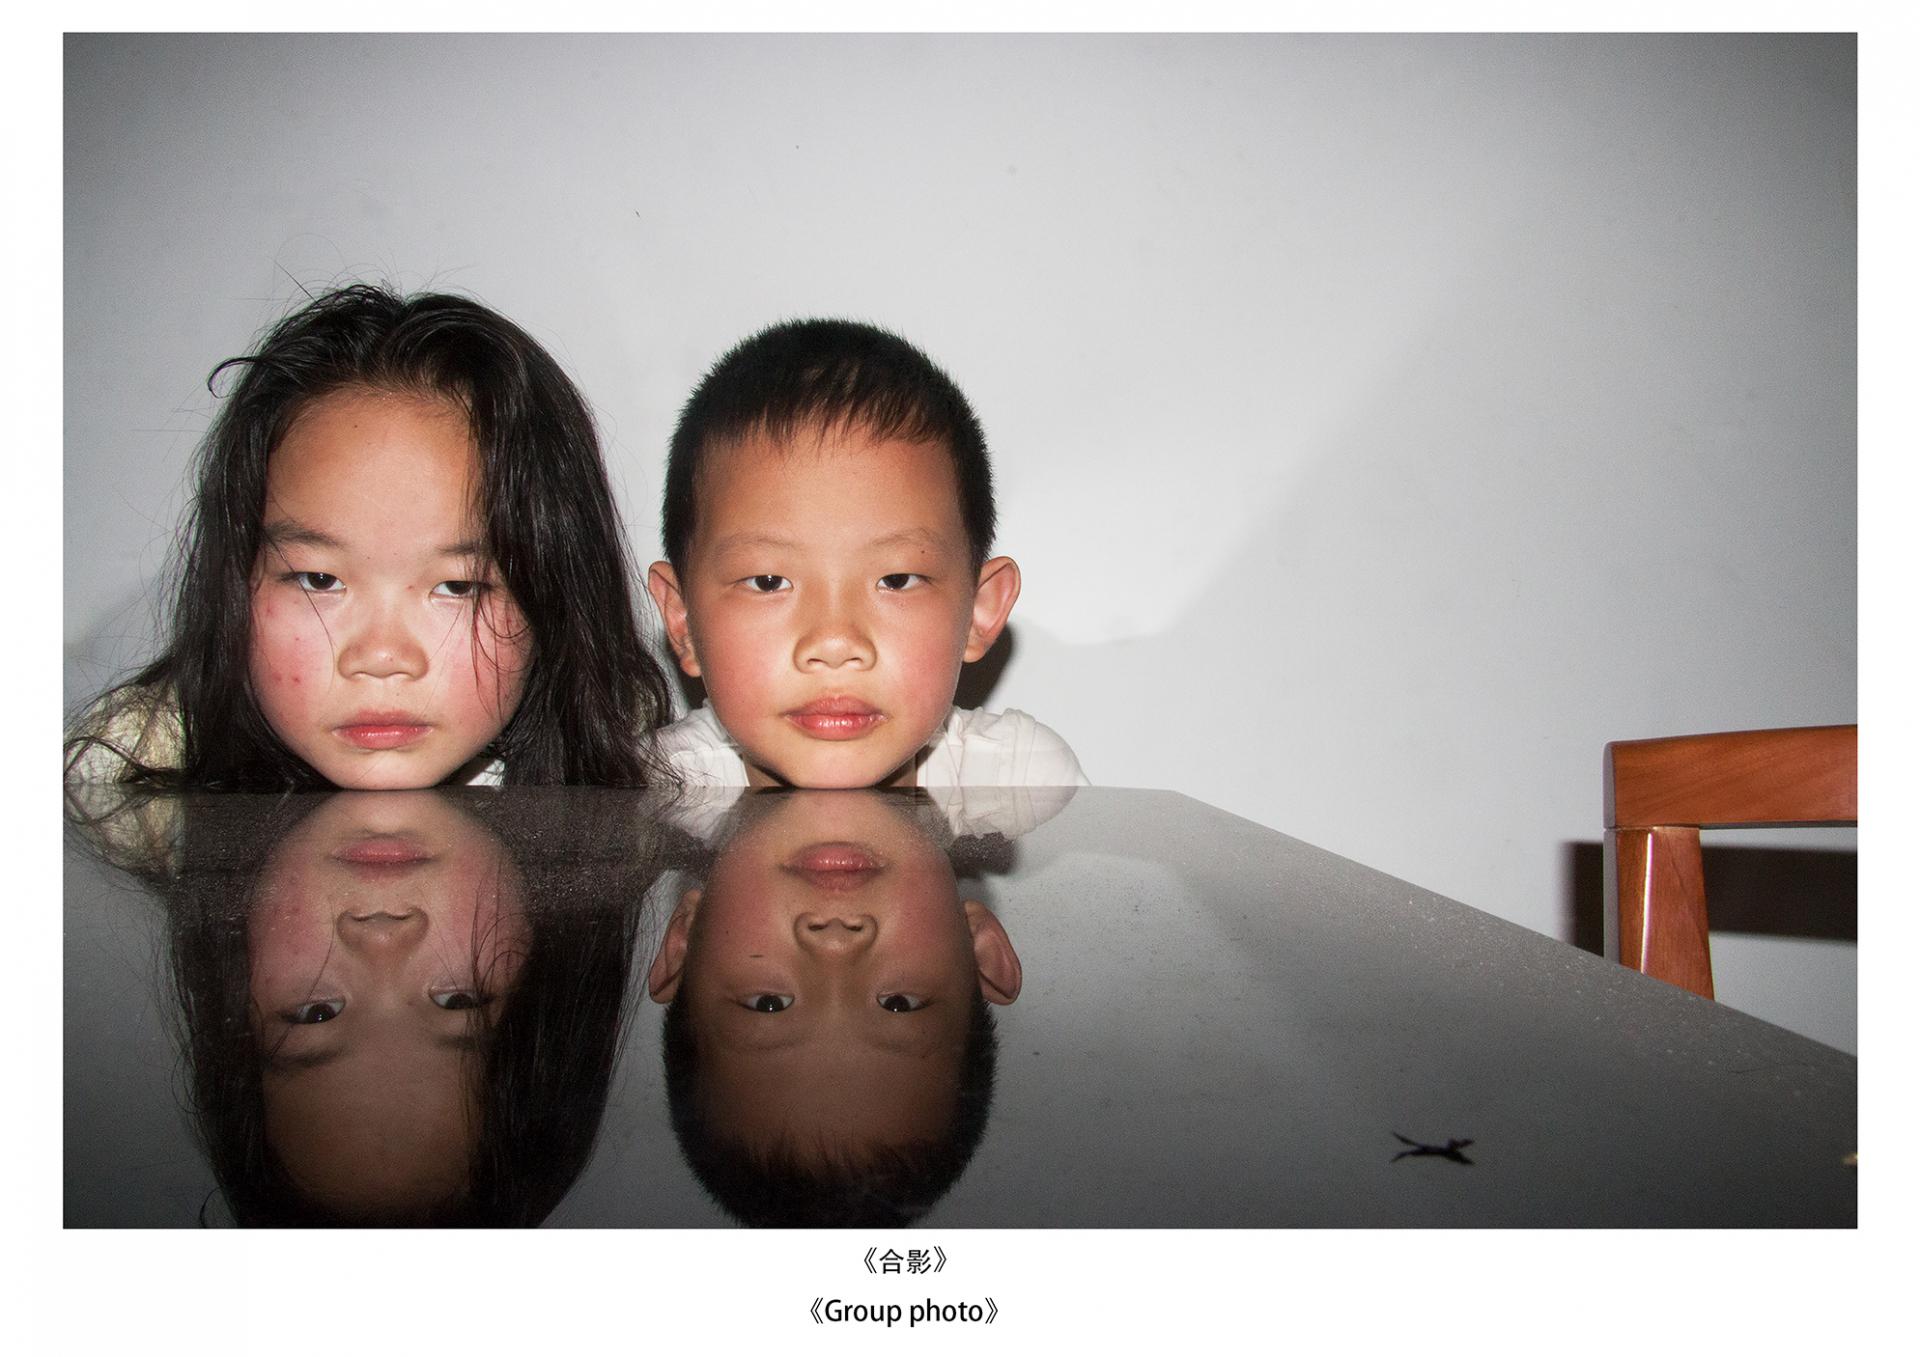  © GUO YUANLIANG， Lose Balance series-Group photo。 Courtesy of the artist and Xitek